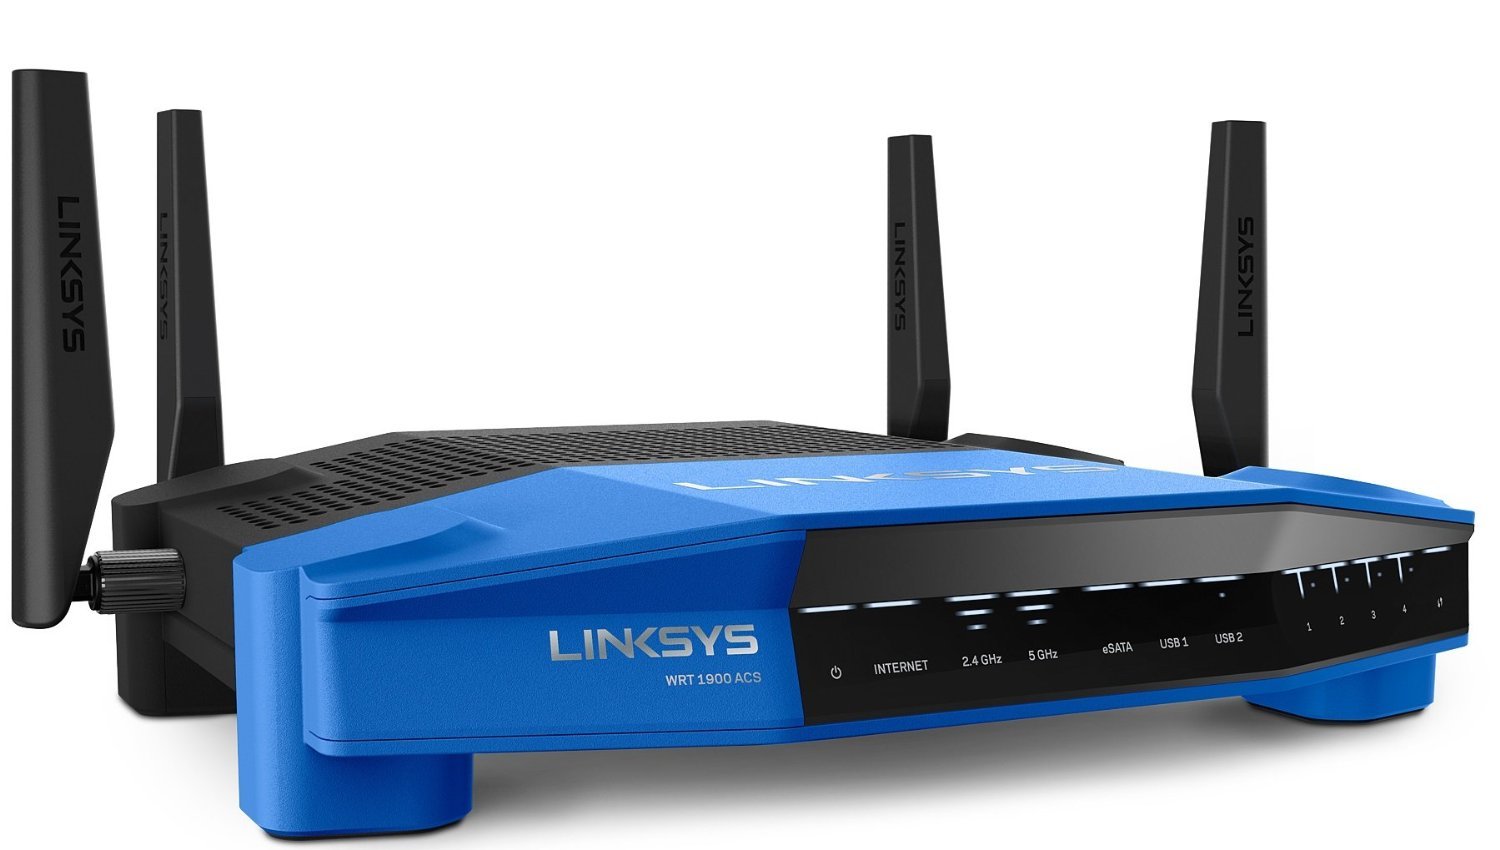 Linksys WRT1900ACS Open Source wifi Router